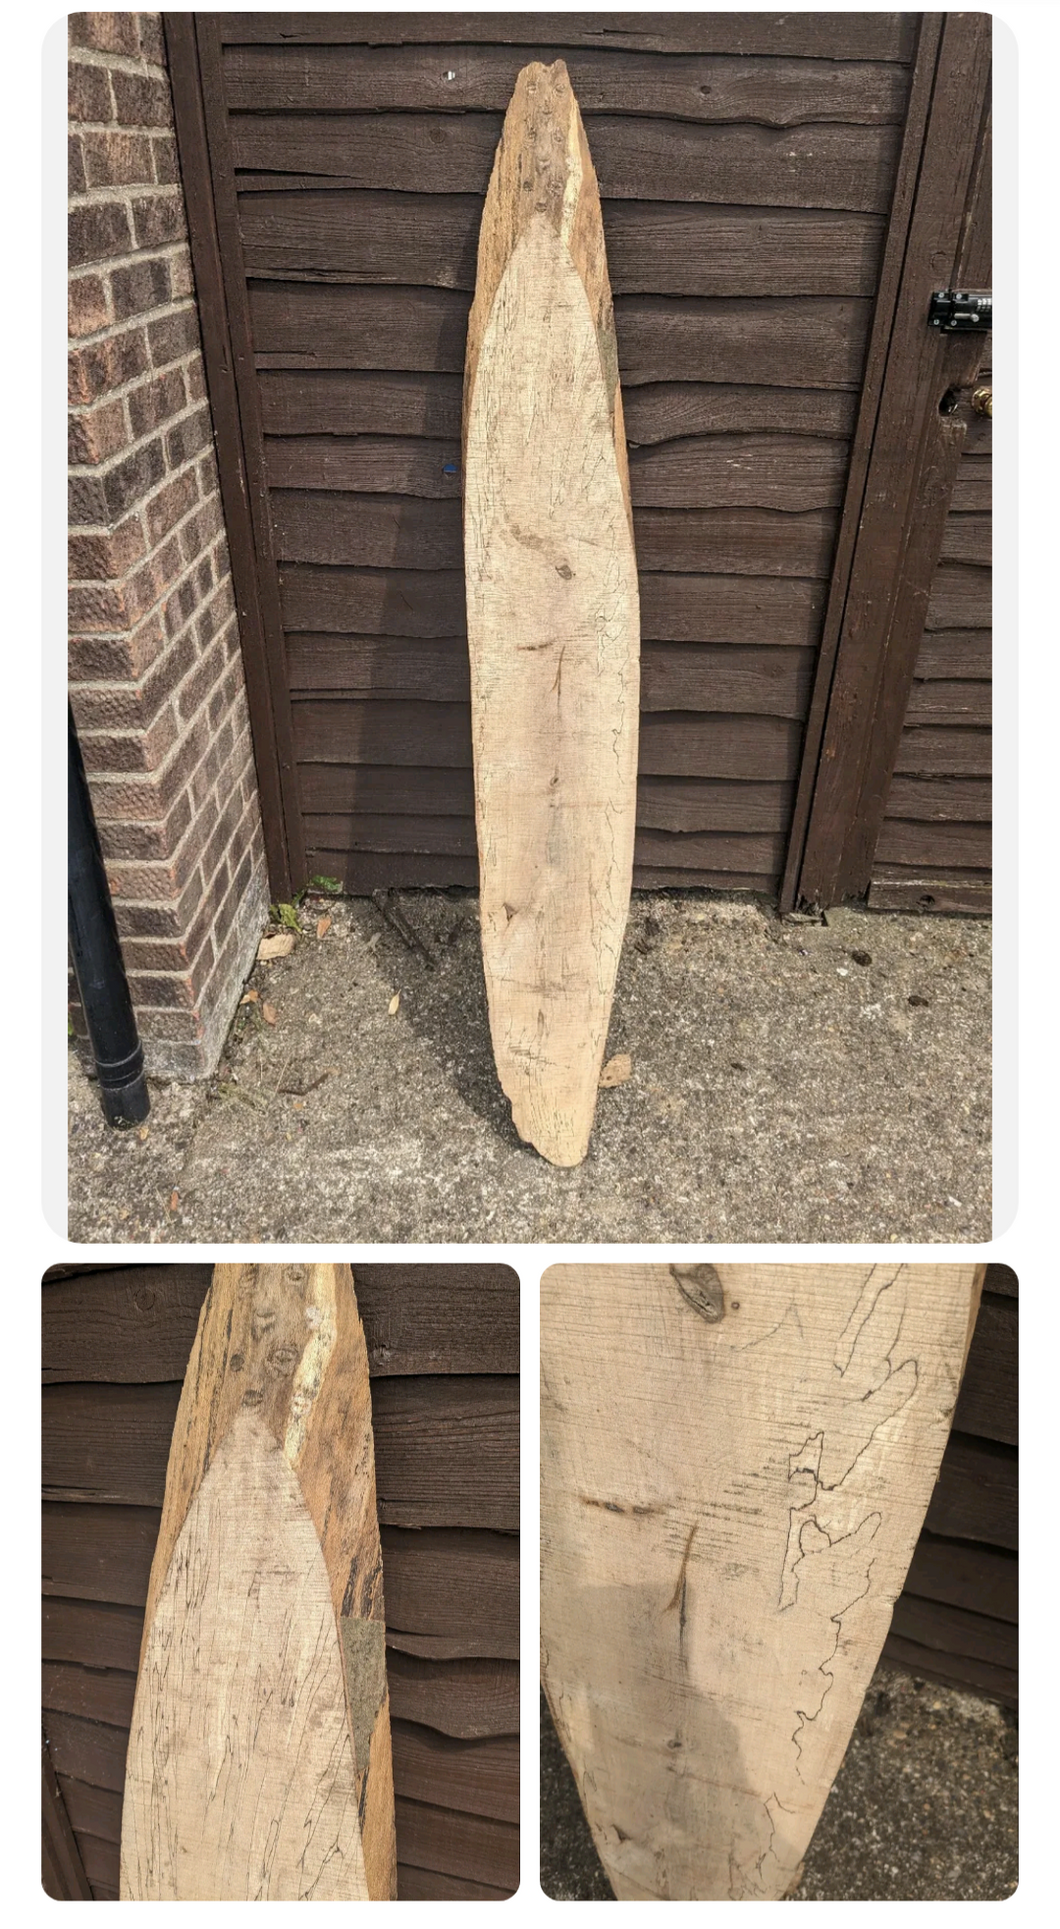 Oval Live Edge Board Ash, Spalted, Kiln Dried. 168 Cm.


Beautiful spalted ash kiln dried oval board